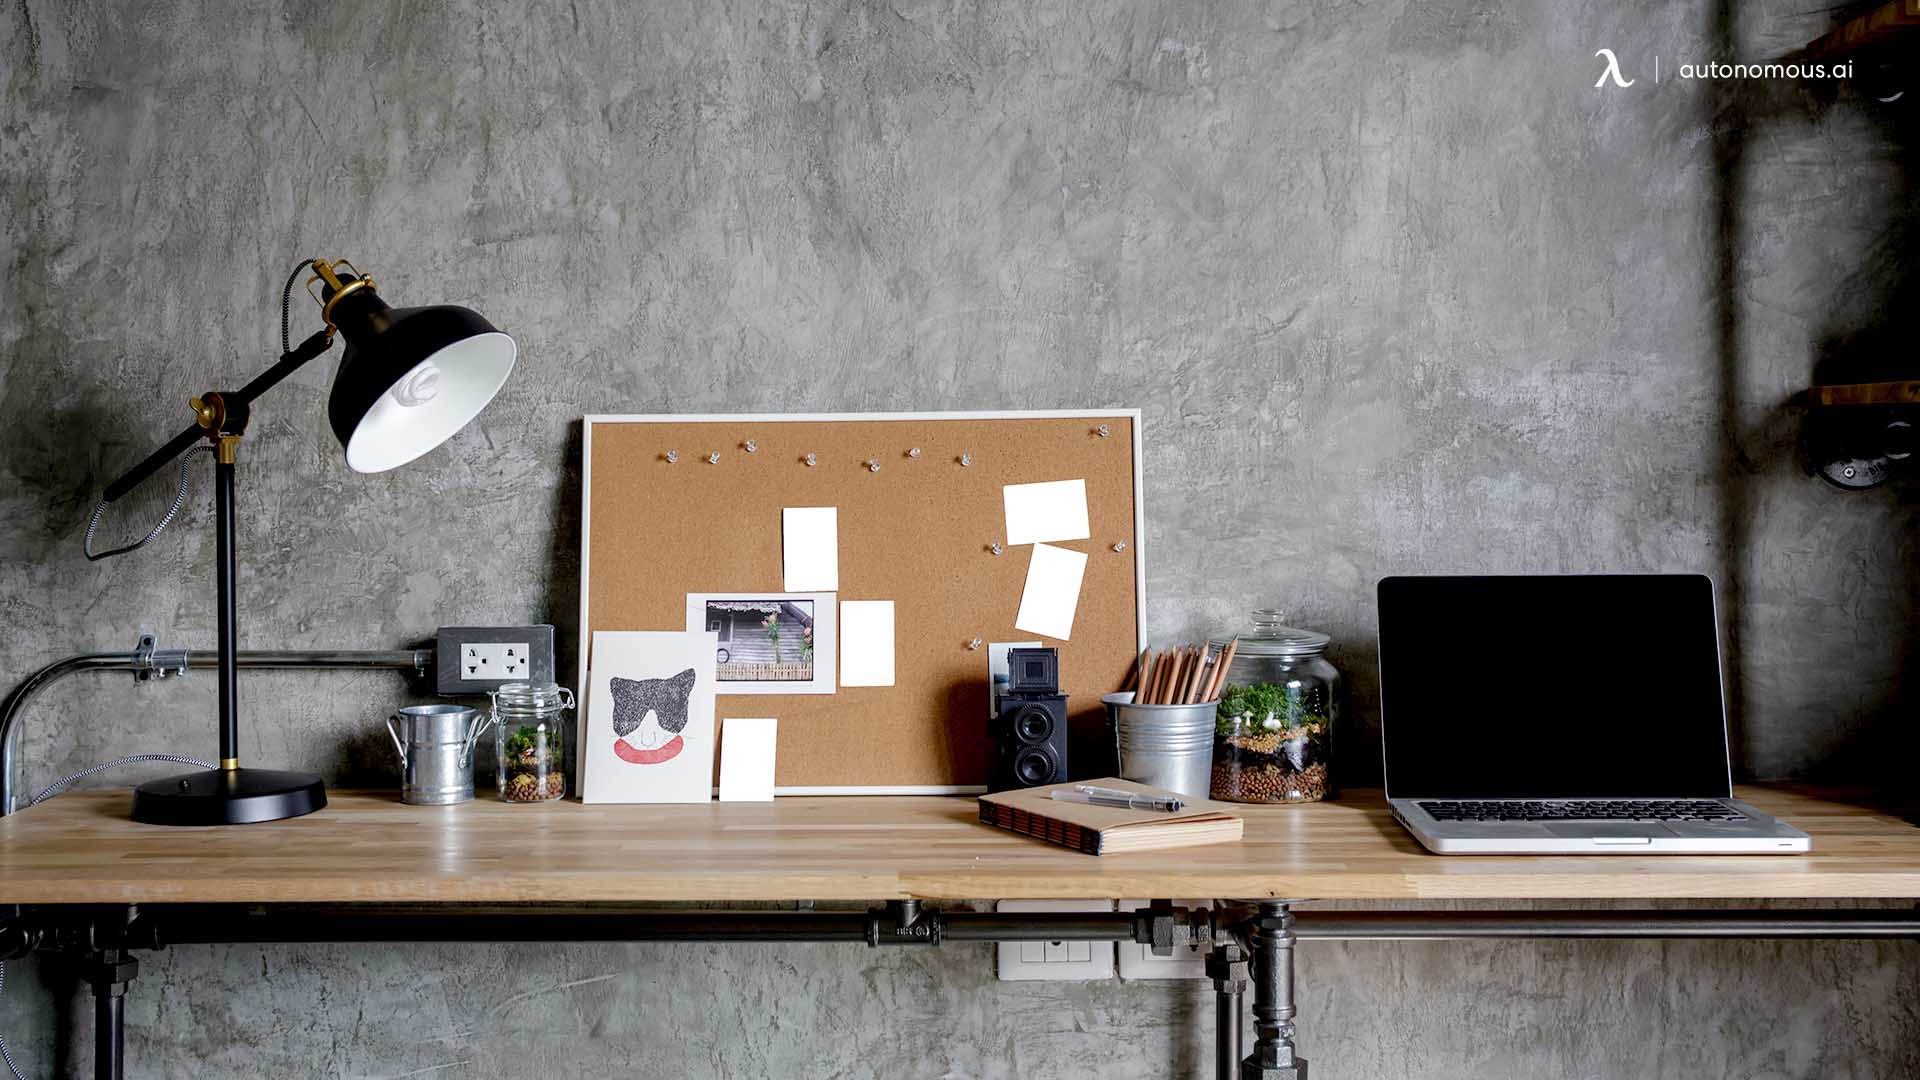 5 Cool Home Office Design Ideas for an Inspirational Workplace